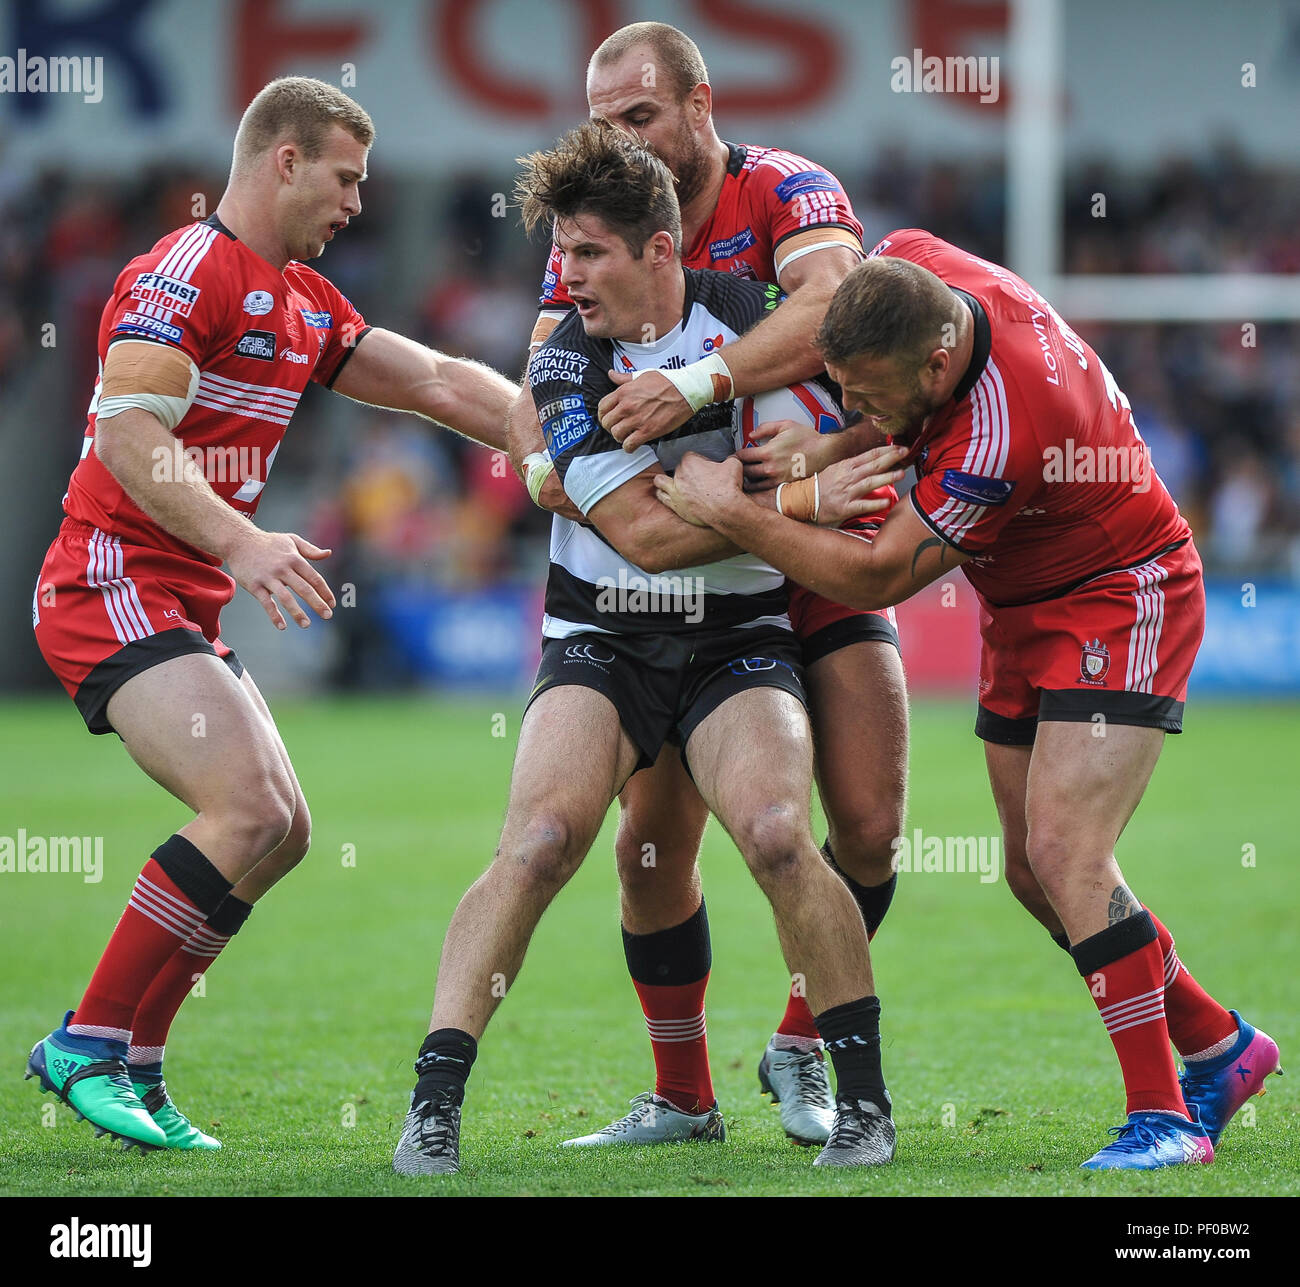 Salford, UK. 18/8/2018. Rugby League Super 8's Salford Red Devils vs Widnes Vikings ; , Widnes Vikings centre Charly Runciman is held by Salford Red Devils defenders at the AJ Bell Stadium, Salford, UK. Dean Williams Stock Photo